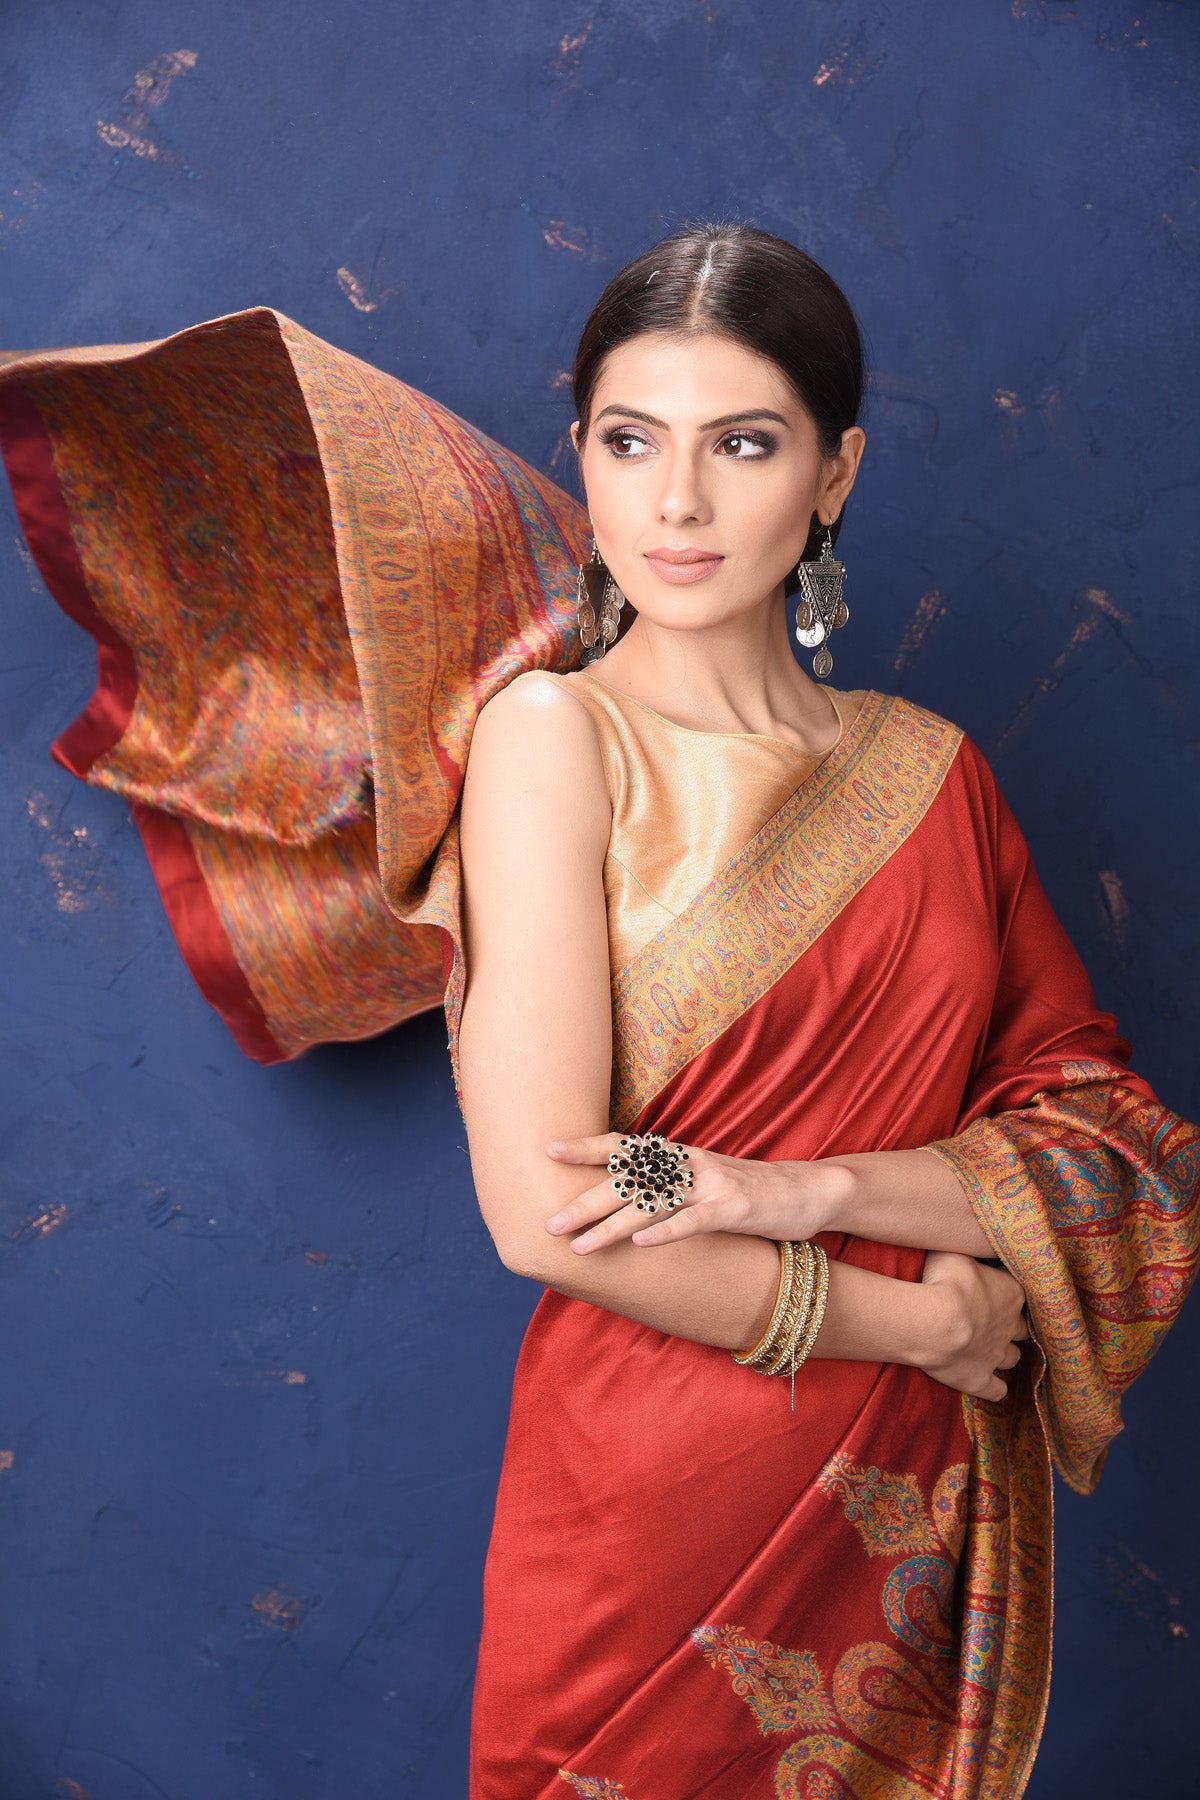 Buy gorgeous red tussar muga silk saree online in USA with Kani border. Buy latest designer sarees, handloom saris, embroidered sarees, Bollywood sarees, fancy sarees for special occasions from Pure Elegance Indian fashion store in USA. Shop soft silk sarees, pure Banarasi sarees, cotton sarees, georgette sarees. -closeup